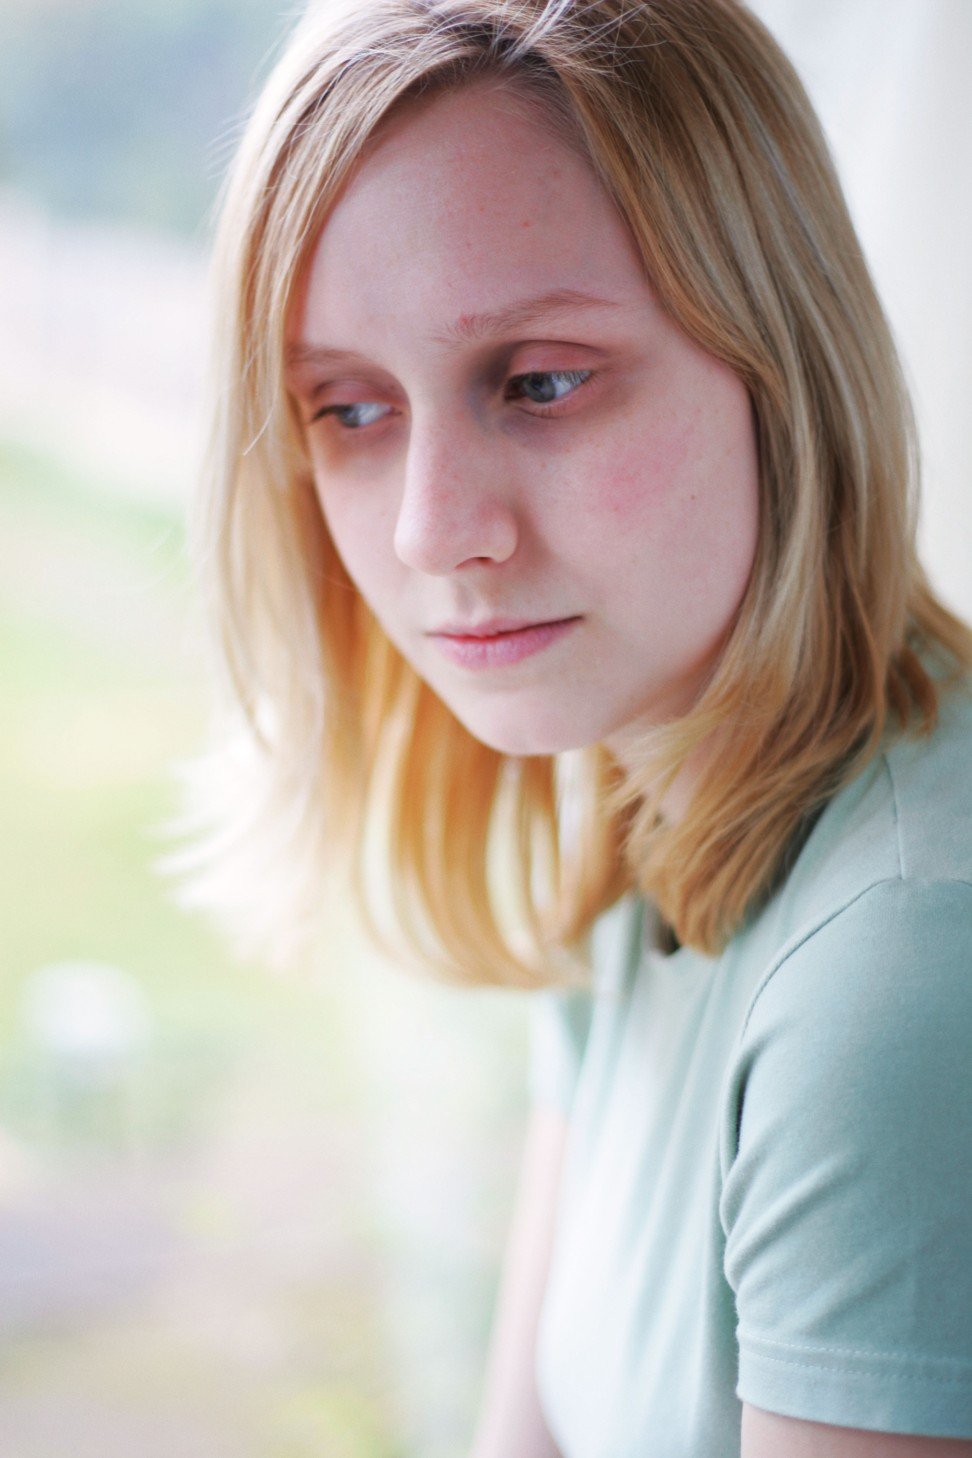 A young woman suffering from ME. Photo: Alamy